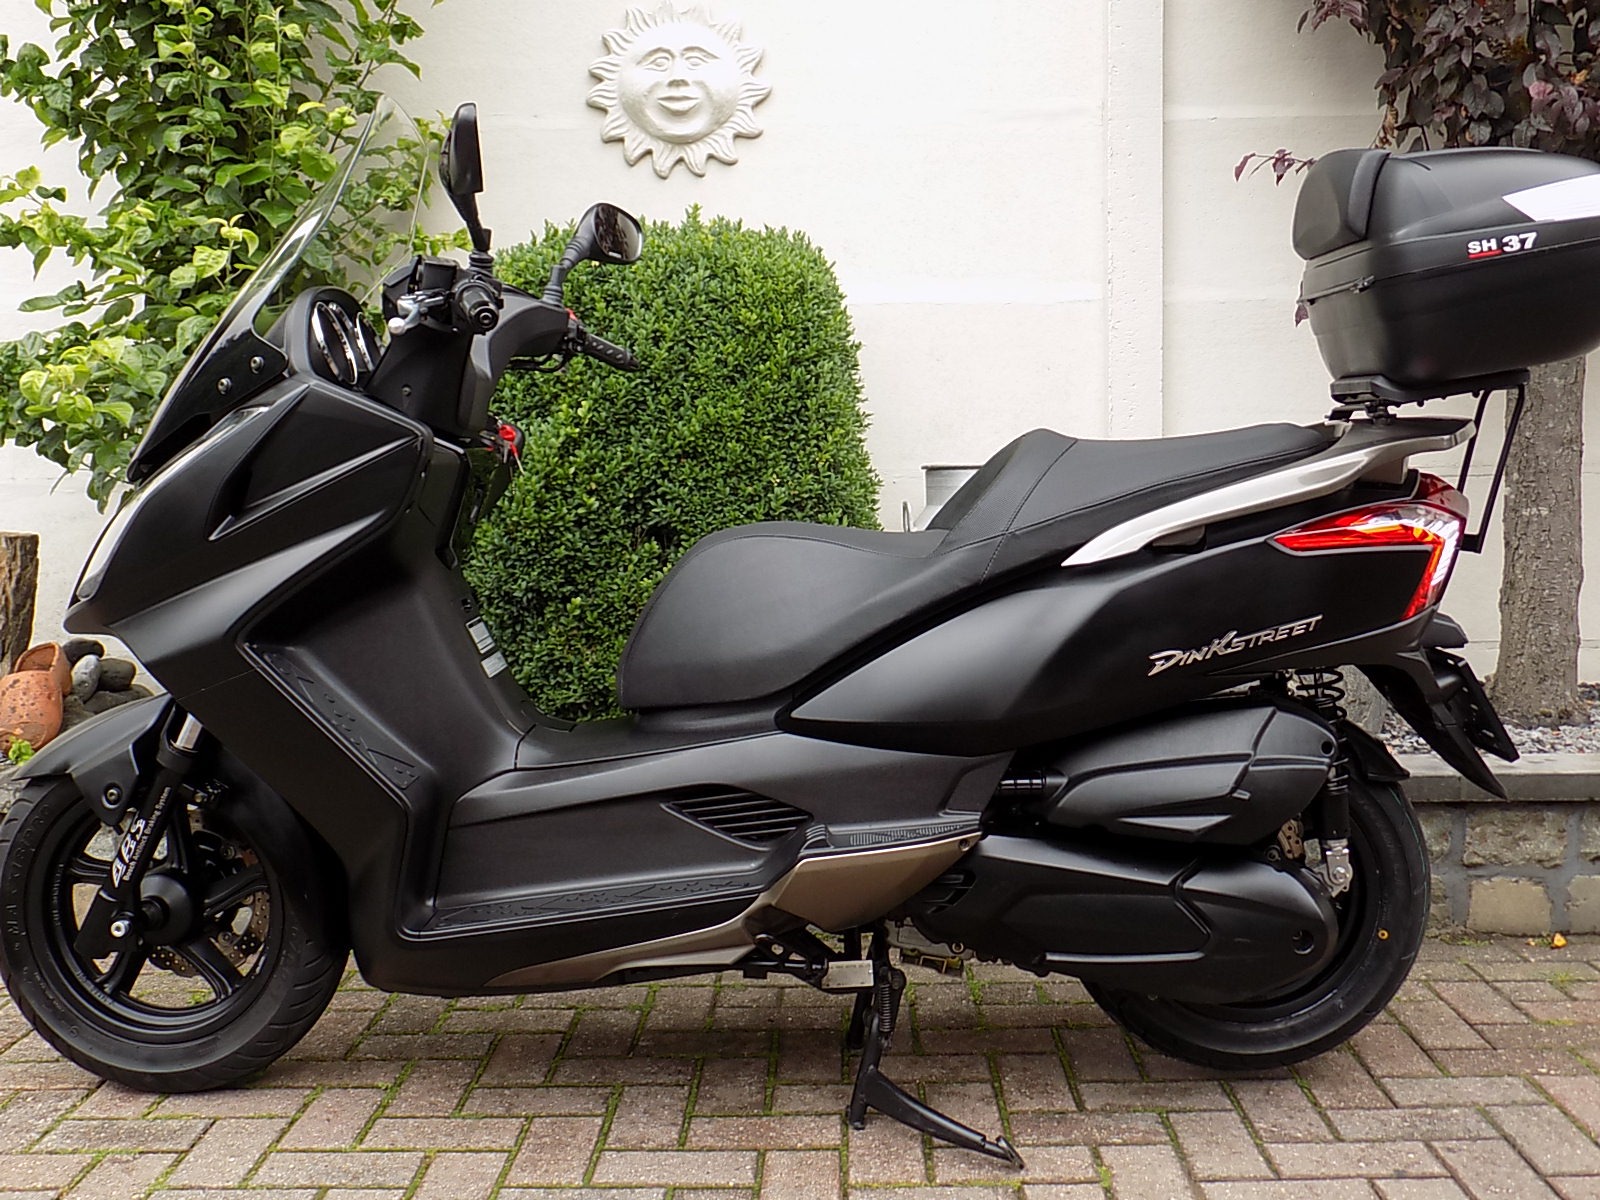 Kymco dink street 300 ABS sport scooter